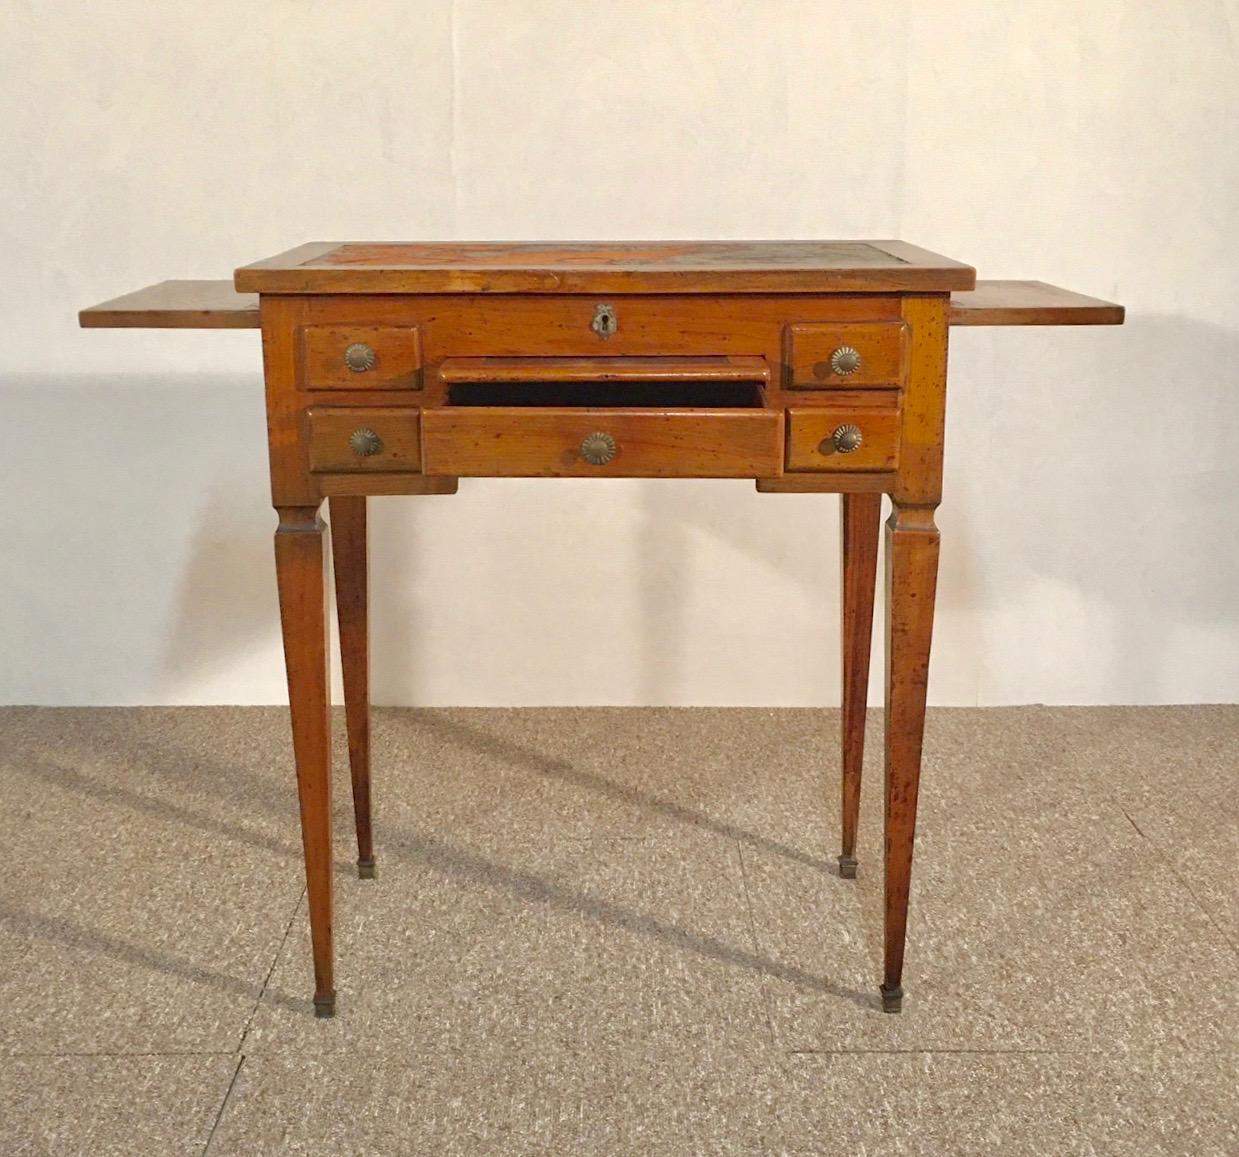 Dressing table for men, 19th period, origin France, in beech wood, with lots of drawers, a mirror, this table can make a writing table, a lot of charm. Needs a makeover if you feel like it.